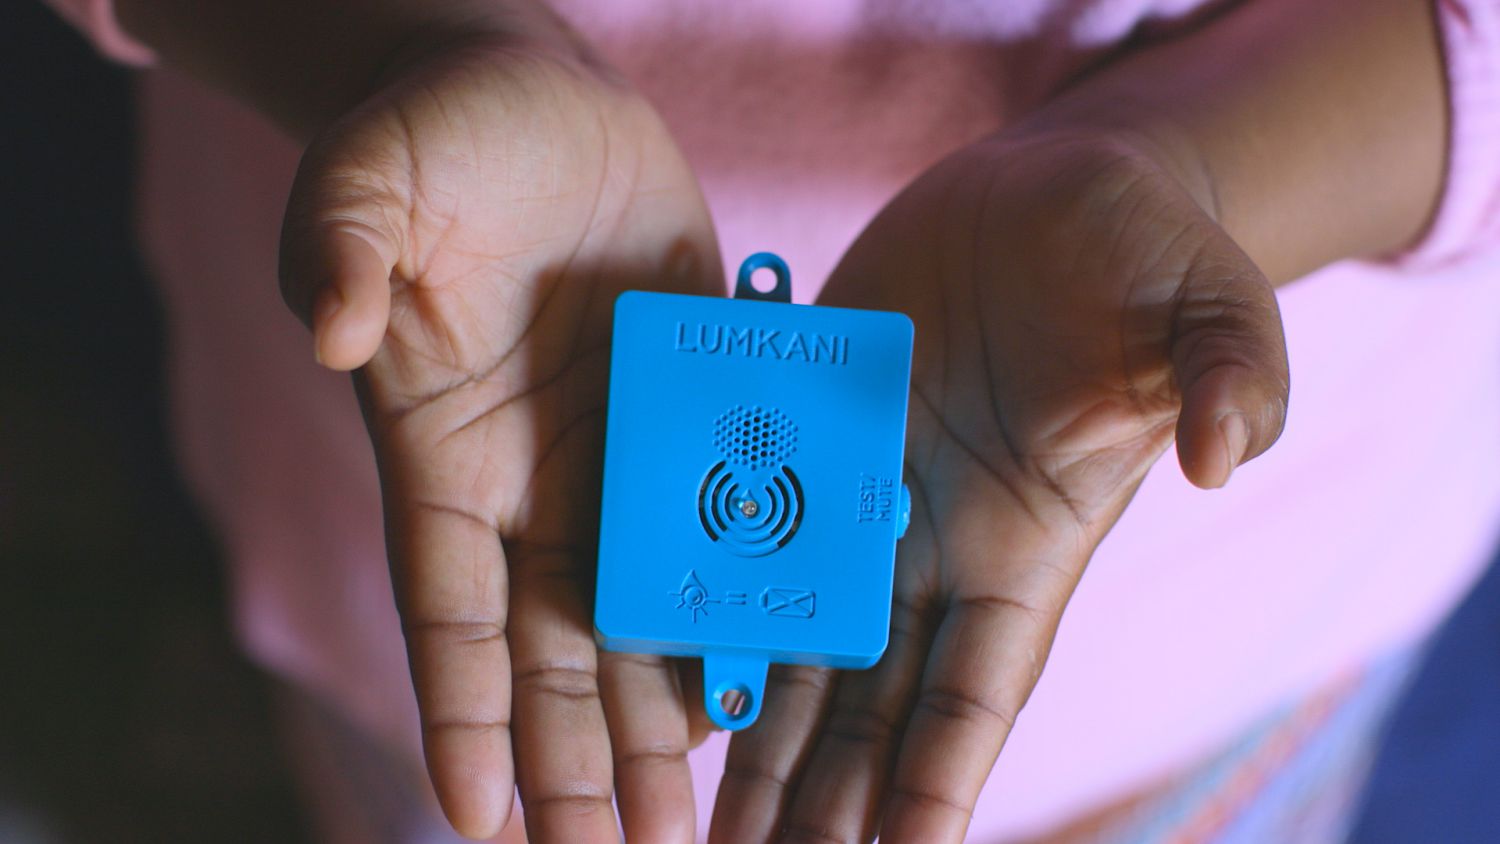 The Lumkani fire detectors measure the rate of rise in temperature in people’s homes and buildings. These low-cost devices are specially designed for the smoky conditions in South African shacks: they detect dangerous levels of heat, not smoke. 
